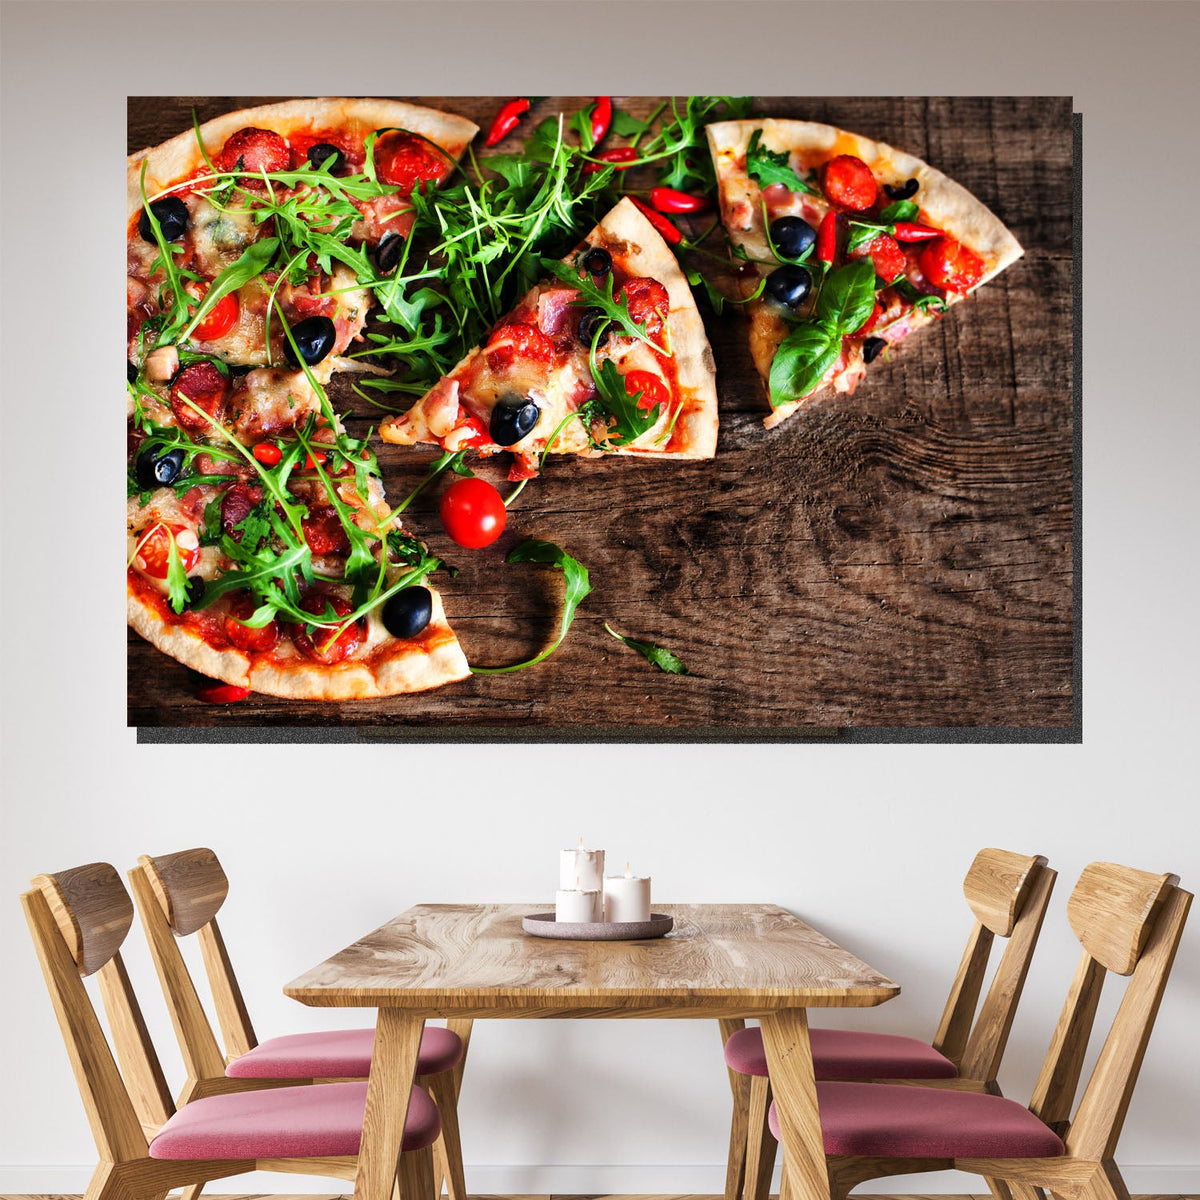 https://cdn.shopify.com/s/files/1/0387/9986/8044/products/PizzaFiestaCanvasArtprintStretched-2.jpg